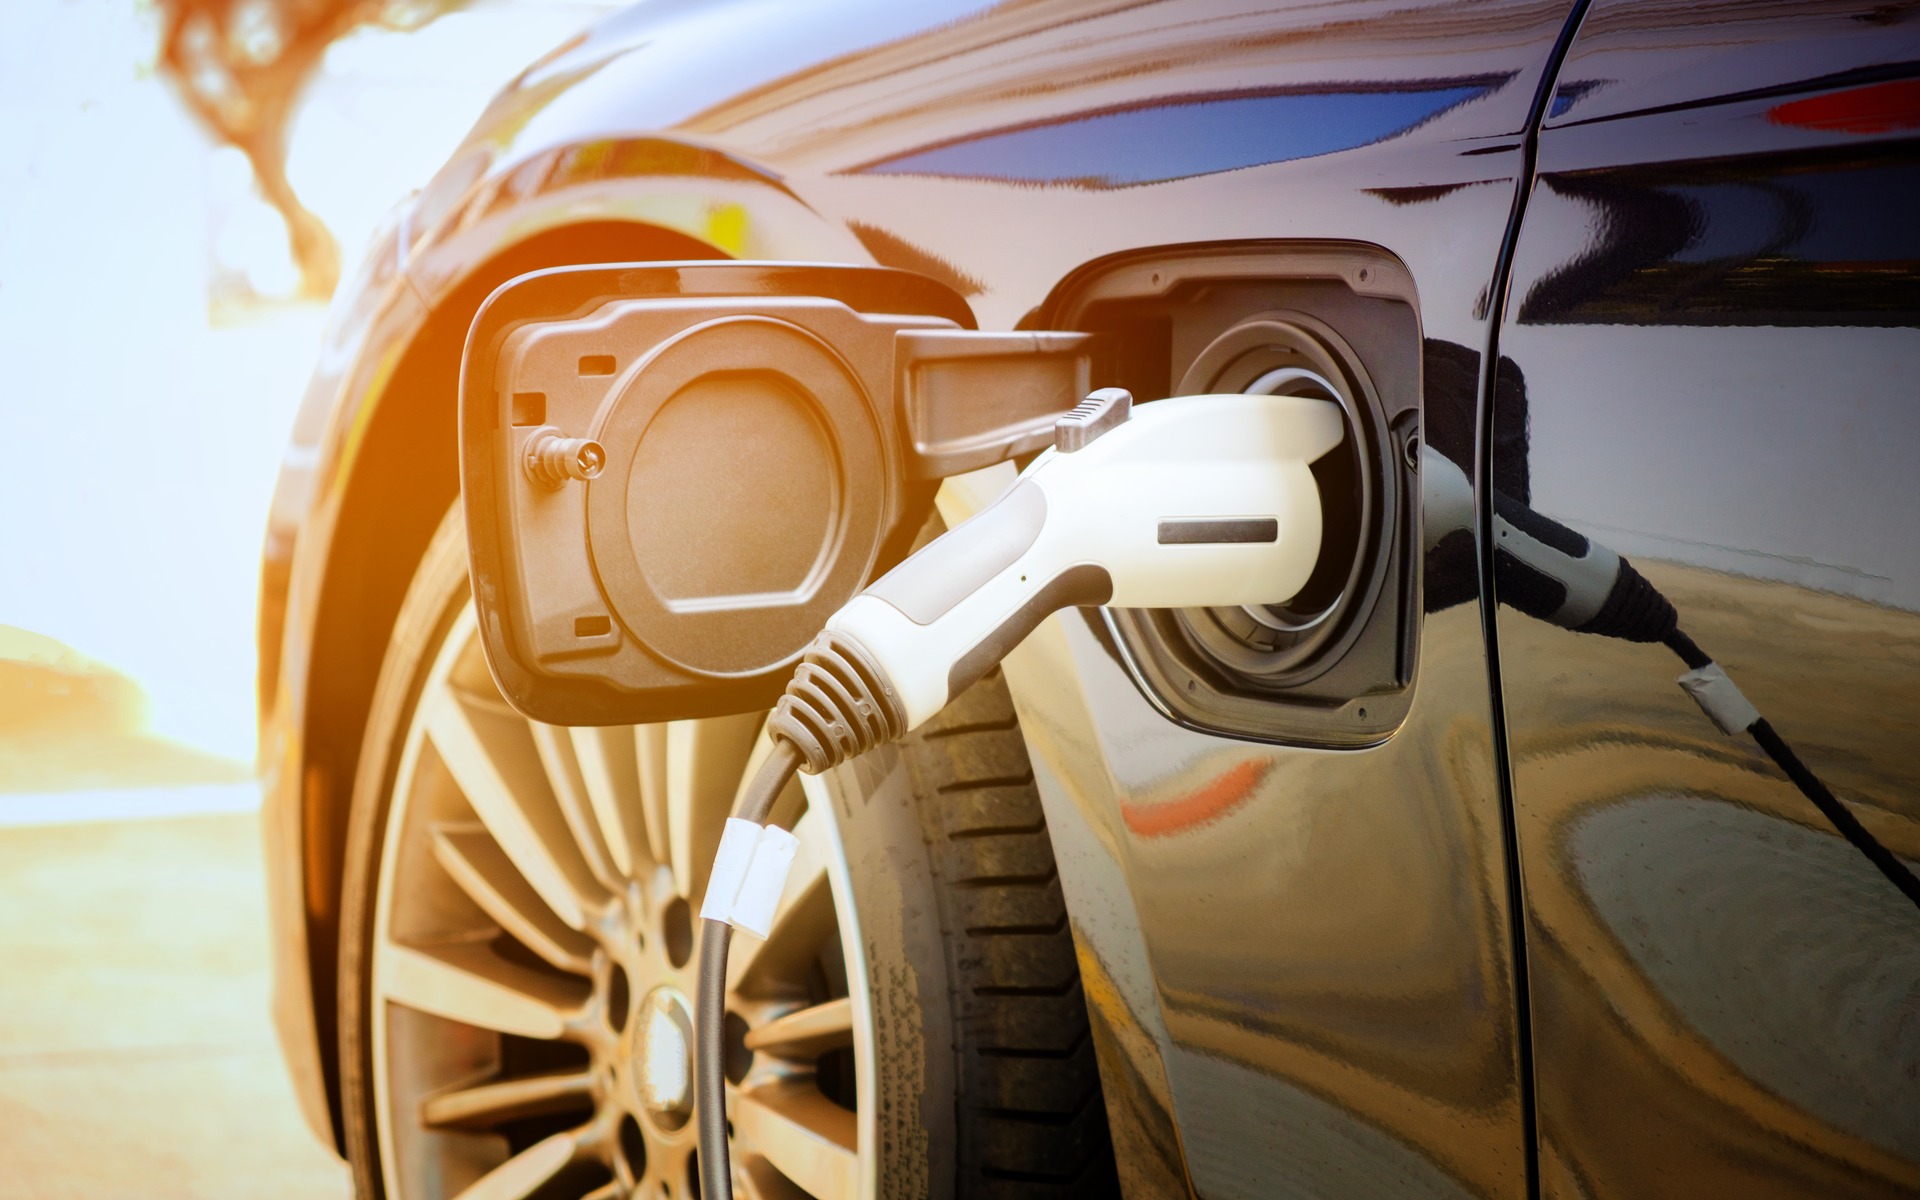 2019-federal-budget-new-rebate-for-electric-vehicles-the-car-guide